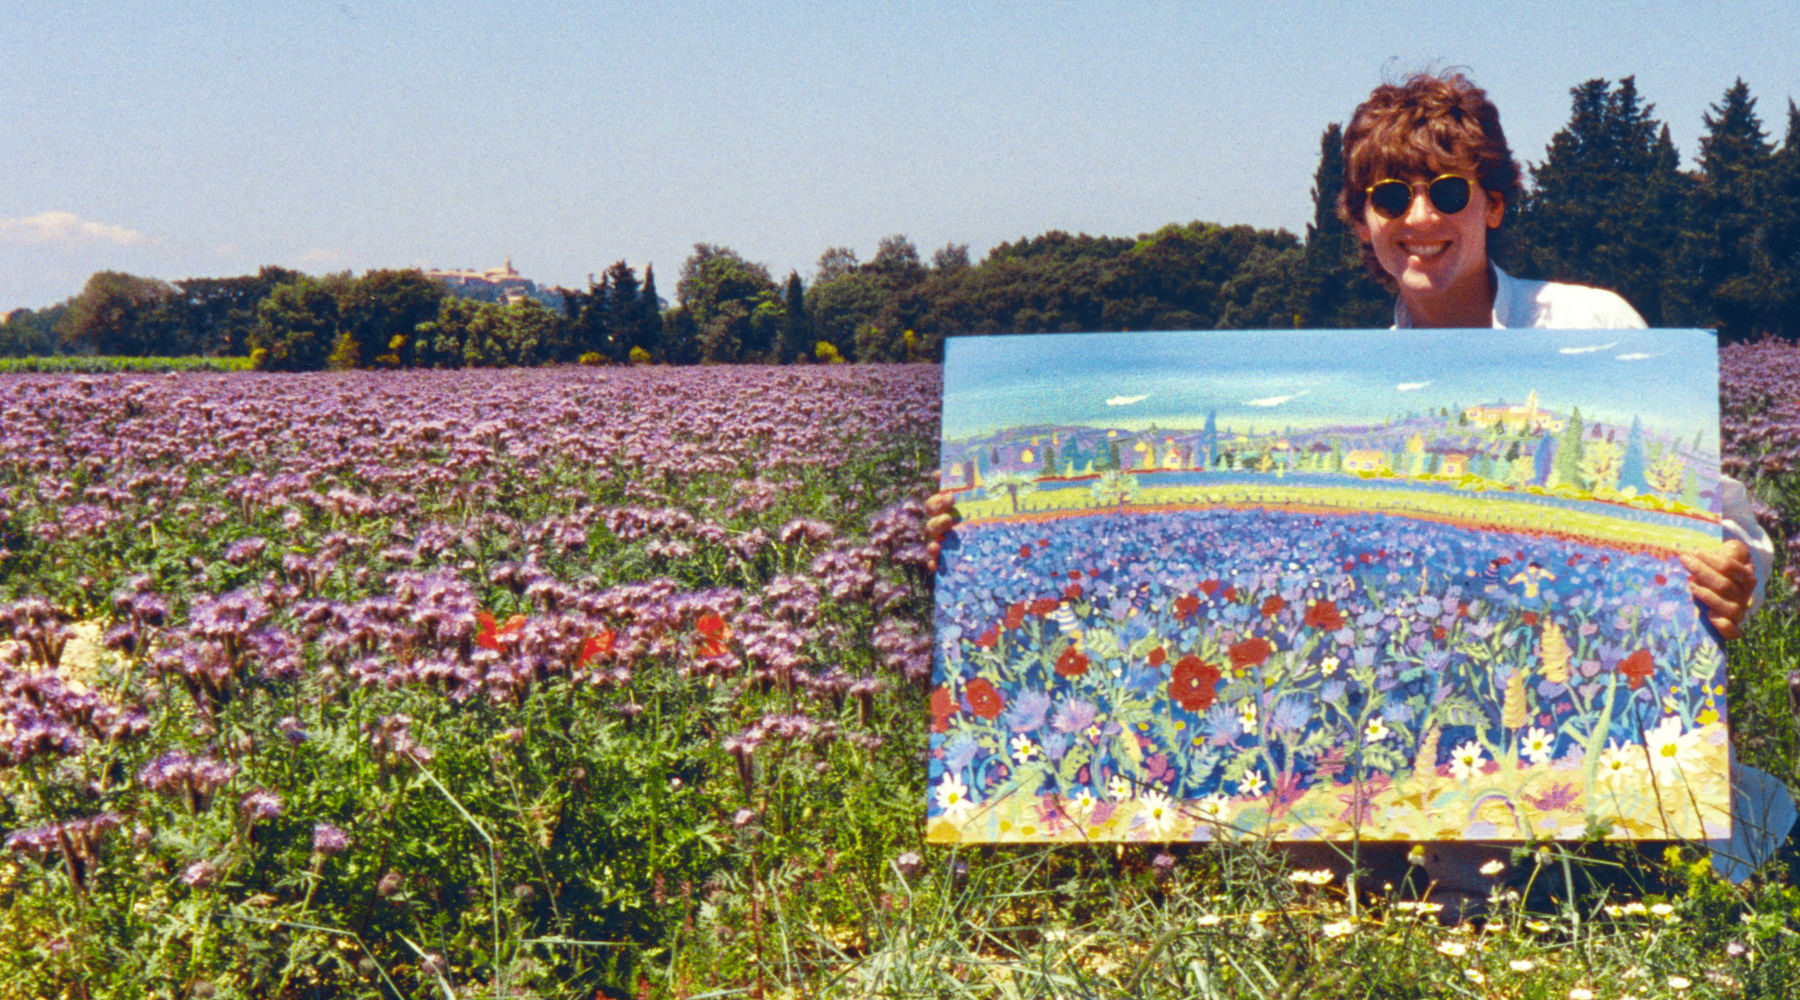 Painting France - John Dyer and Joanne Short Explore the Artistic Beauty of France Through Paint